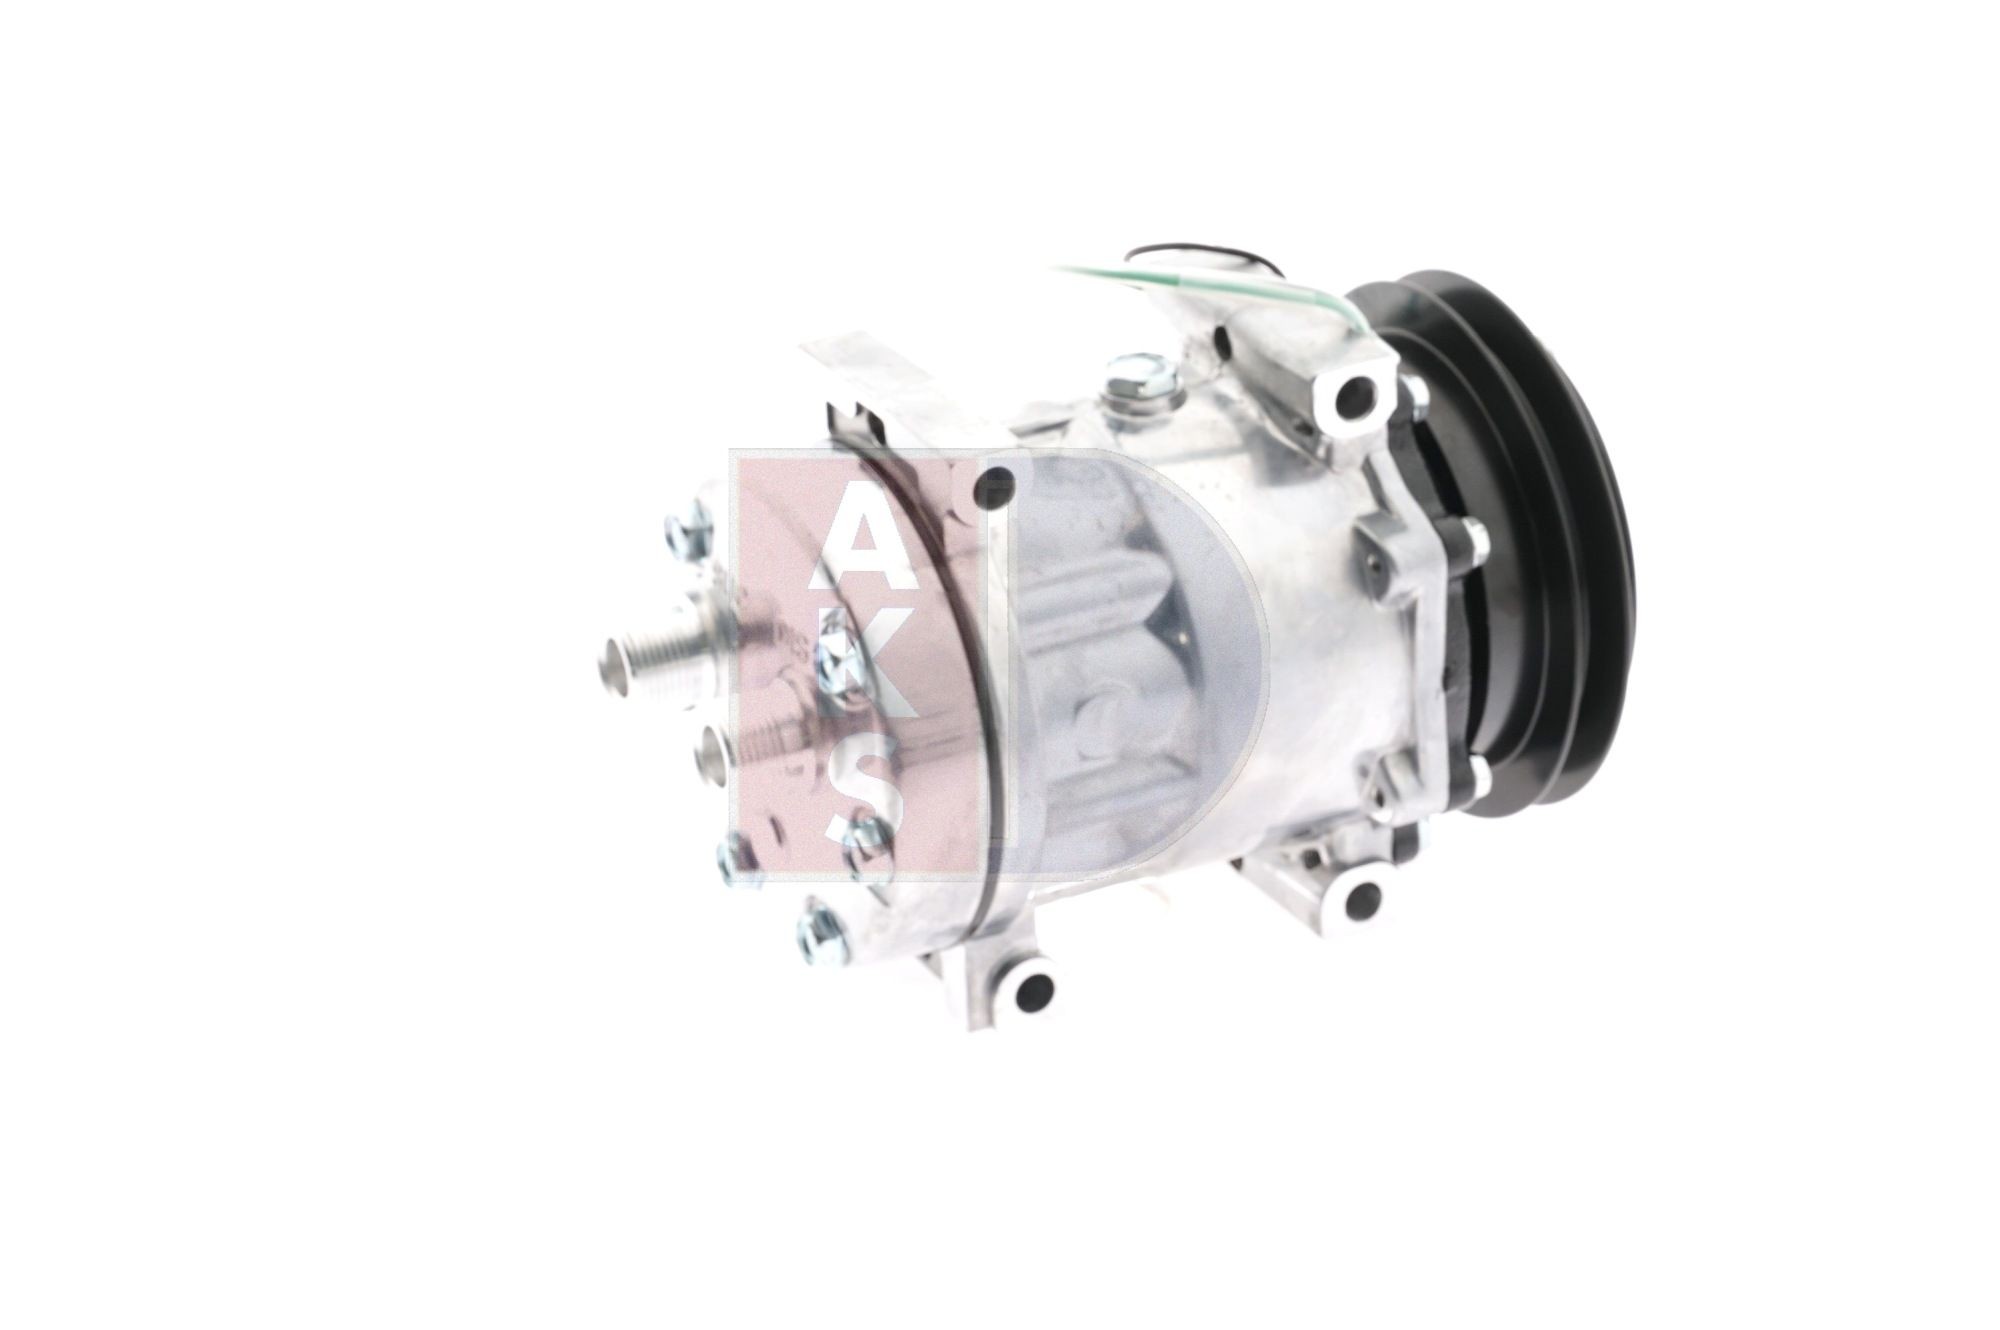 Air conditioning compressor 851795N from AKS DASIS